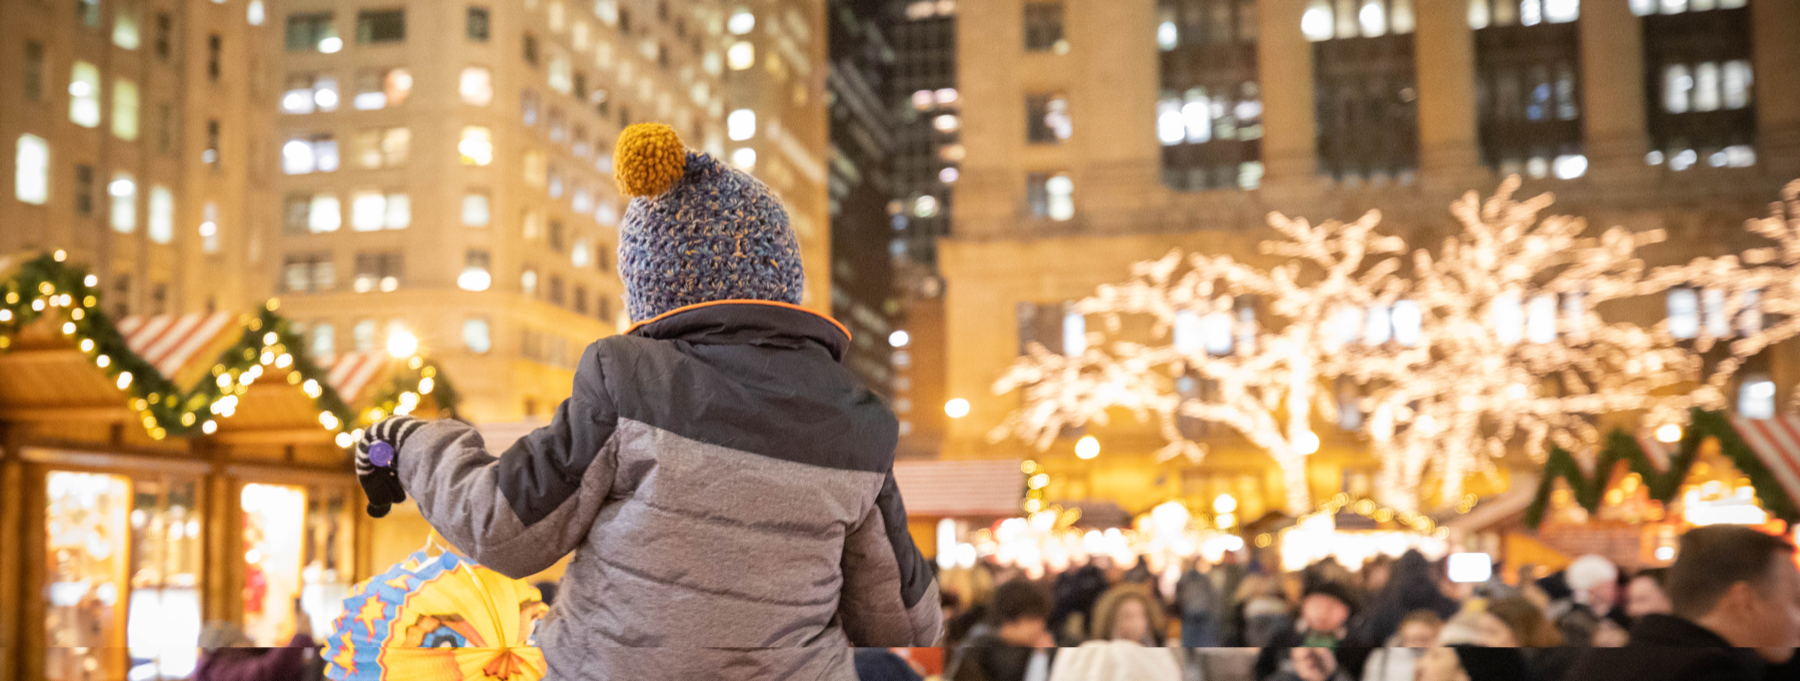 Christmas Events for Kids in Chicago | Family Holiday Events